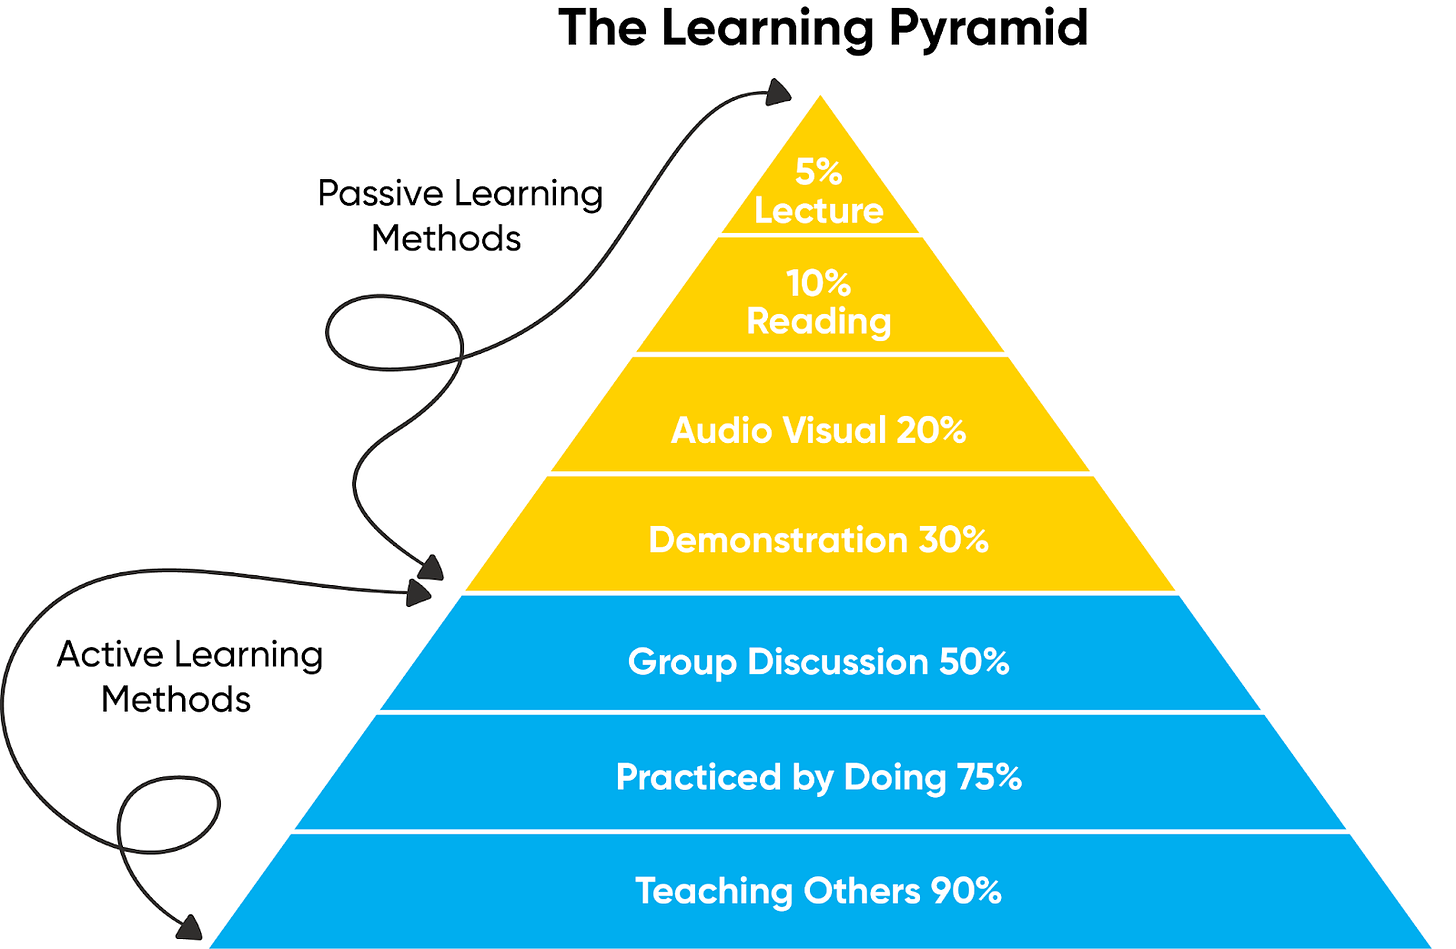 Overview of the learning pyramid for training providers